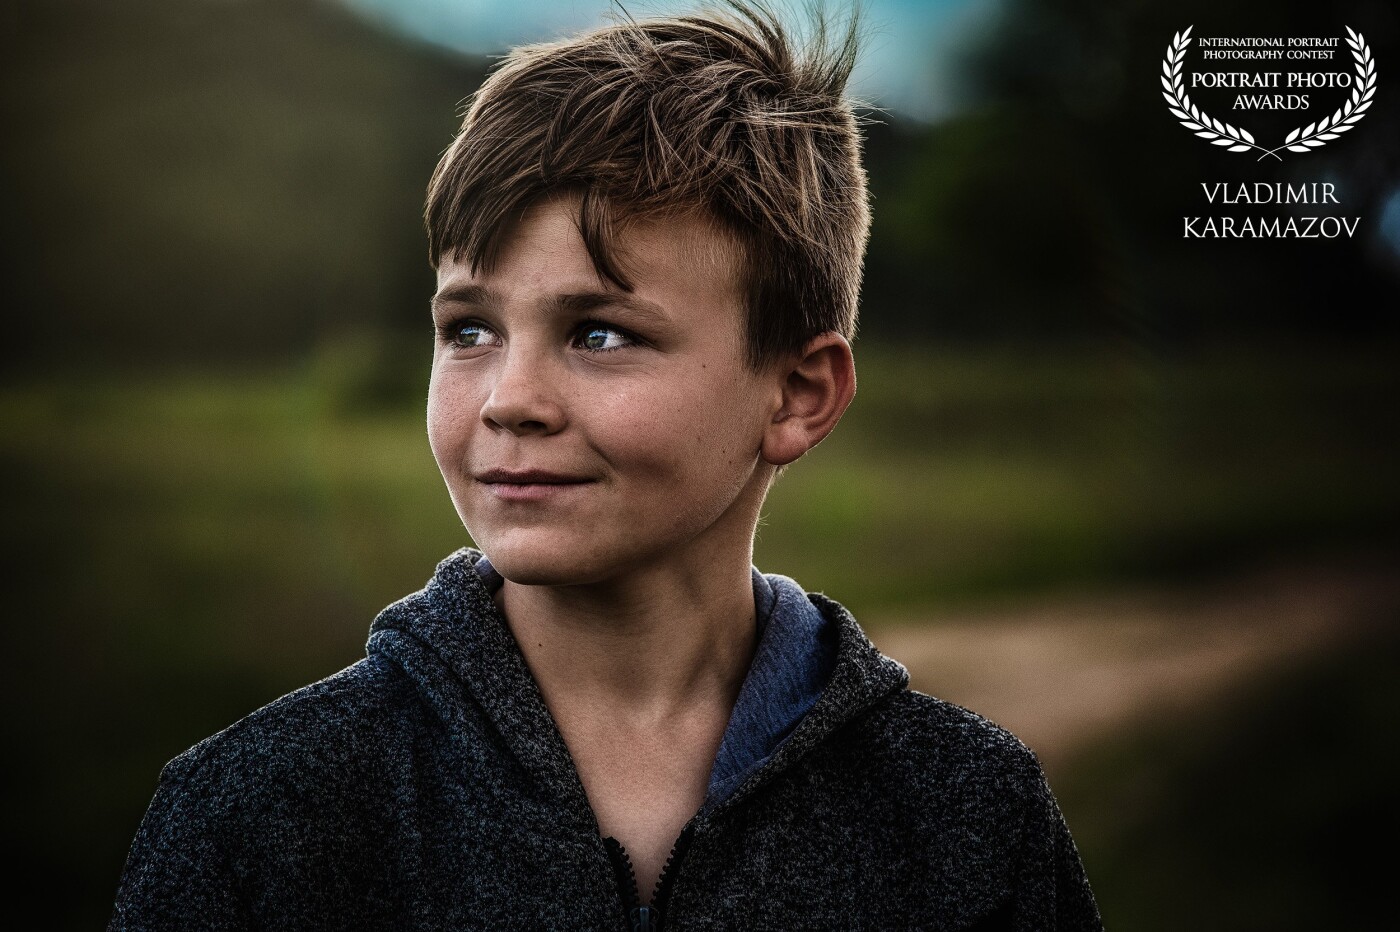 I saw this boy from my car in the mountains near a small village. I saw his face and jumped out of the car. He was very surprised, but he allowed me to take a picture of him. His emotion was very strong, and he cried. It was a big event for him. The emotion I saw in his eyes also captivated me. 